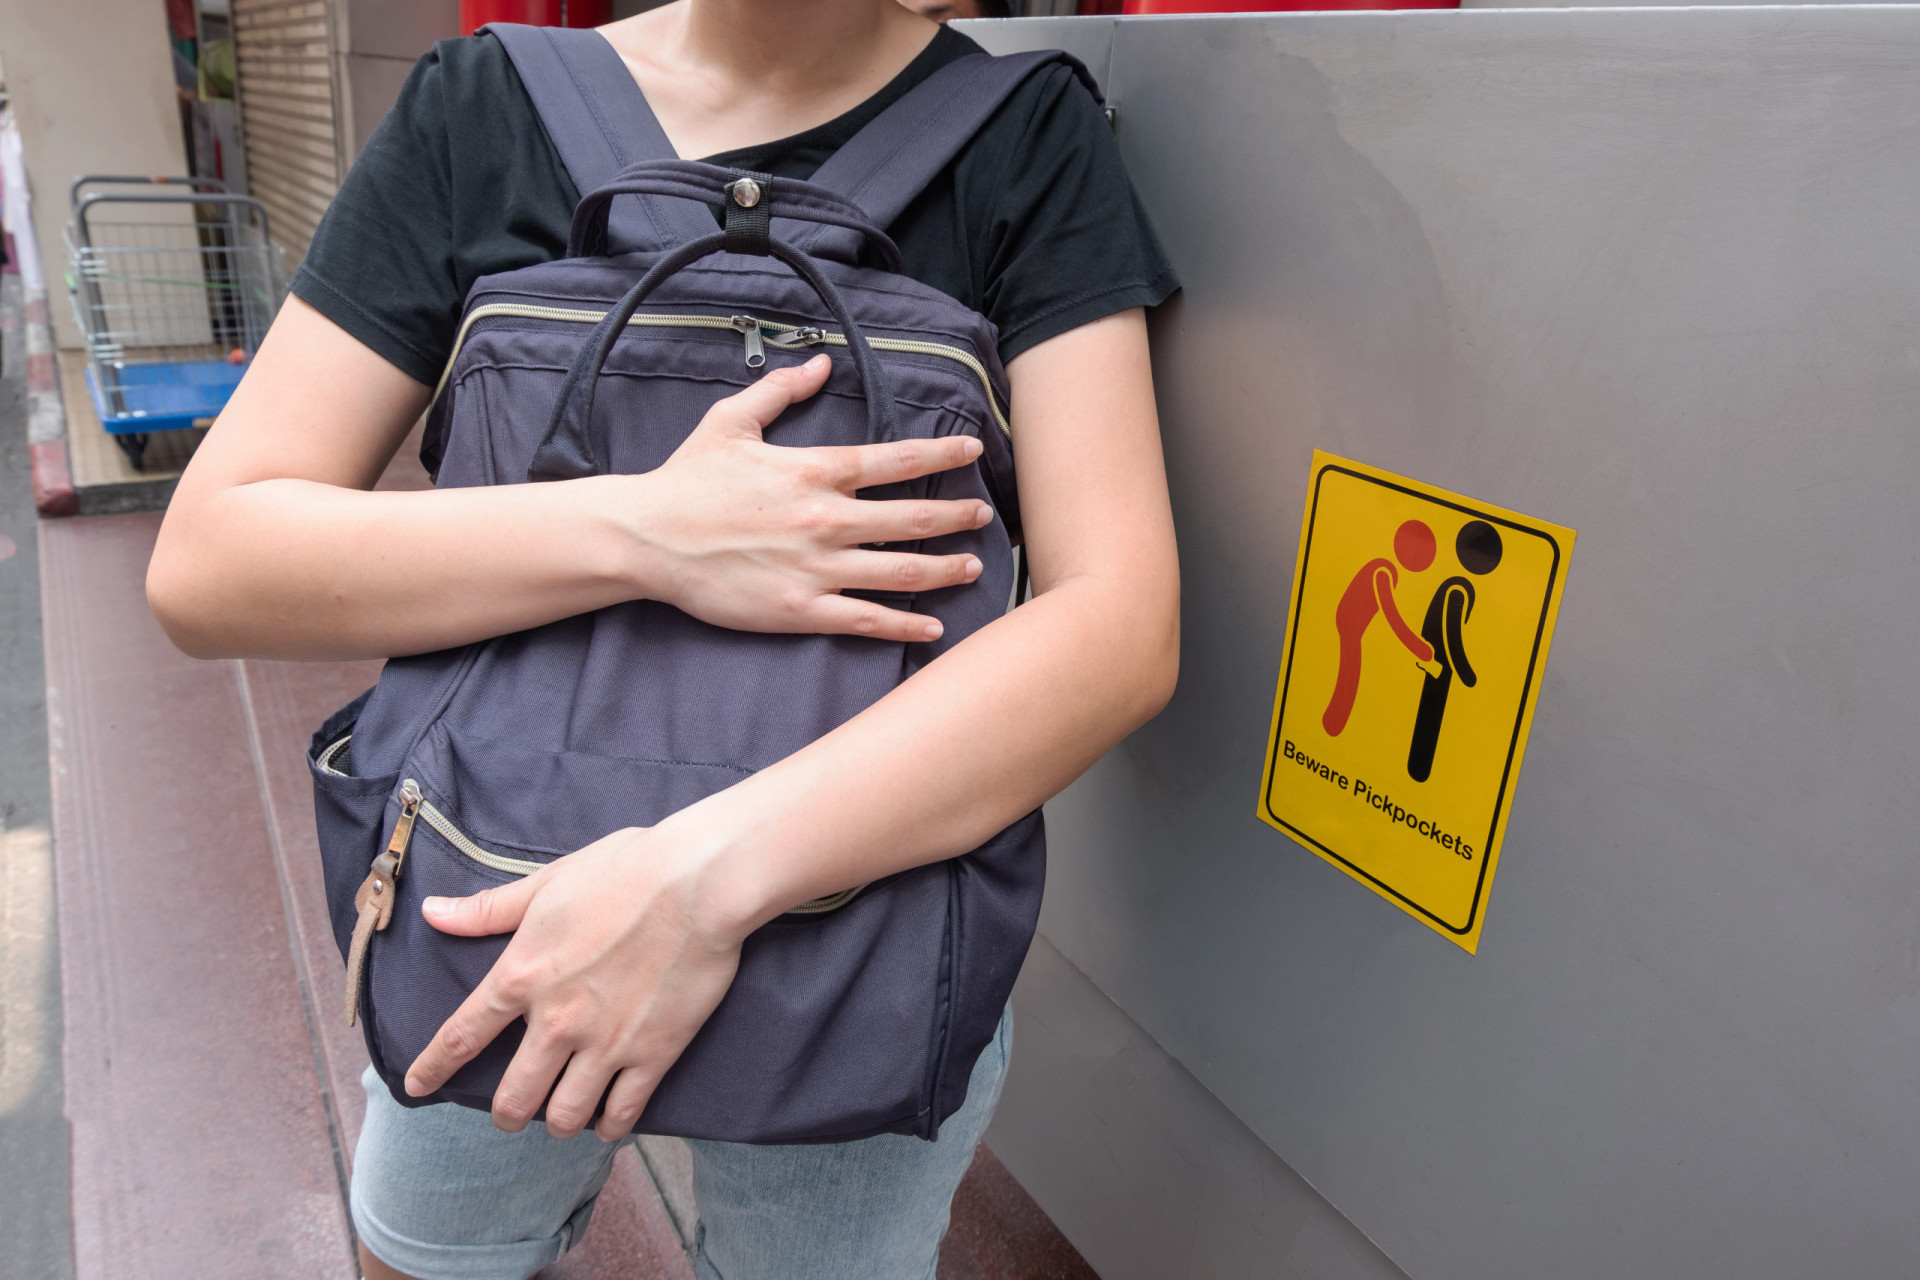 <p><span>If you see a sign warning about pickpockets in the area, don't touch your pockets or bag to check on your valuables. This will show watchful thieves where to target.</span></p><p>You may also like:<a href="https://www.starsinsider.com/n/492503?utm_source=msn.com&utm_medium=display&utm_campaign=referral_description&utm_content=717448en-us"> The truth about Jesus Christ</a></p>